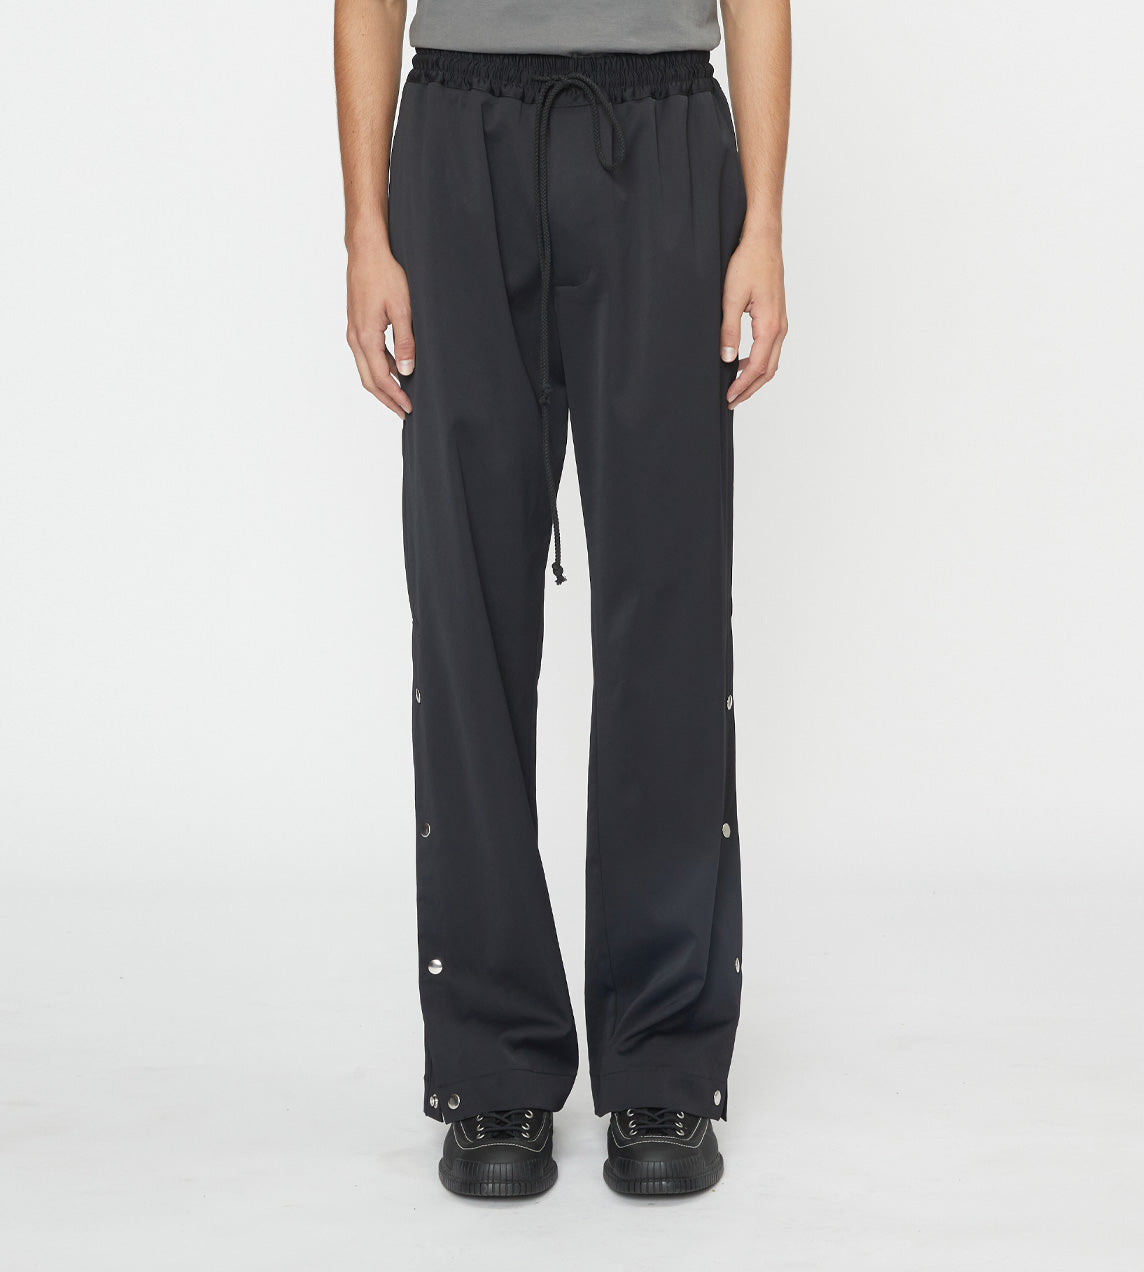 Song For The Mute - Studded Track Pant Black – WDLT117